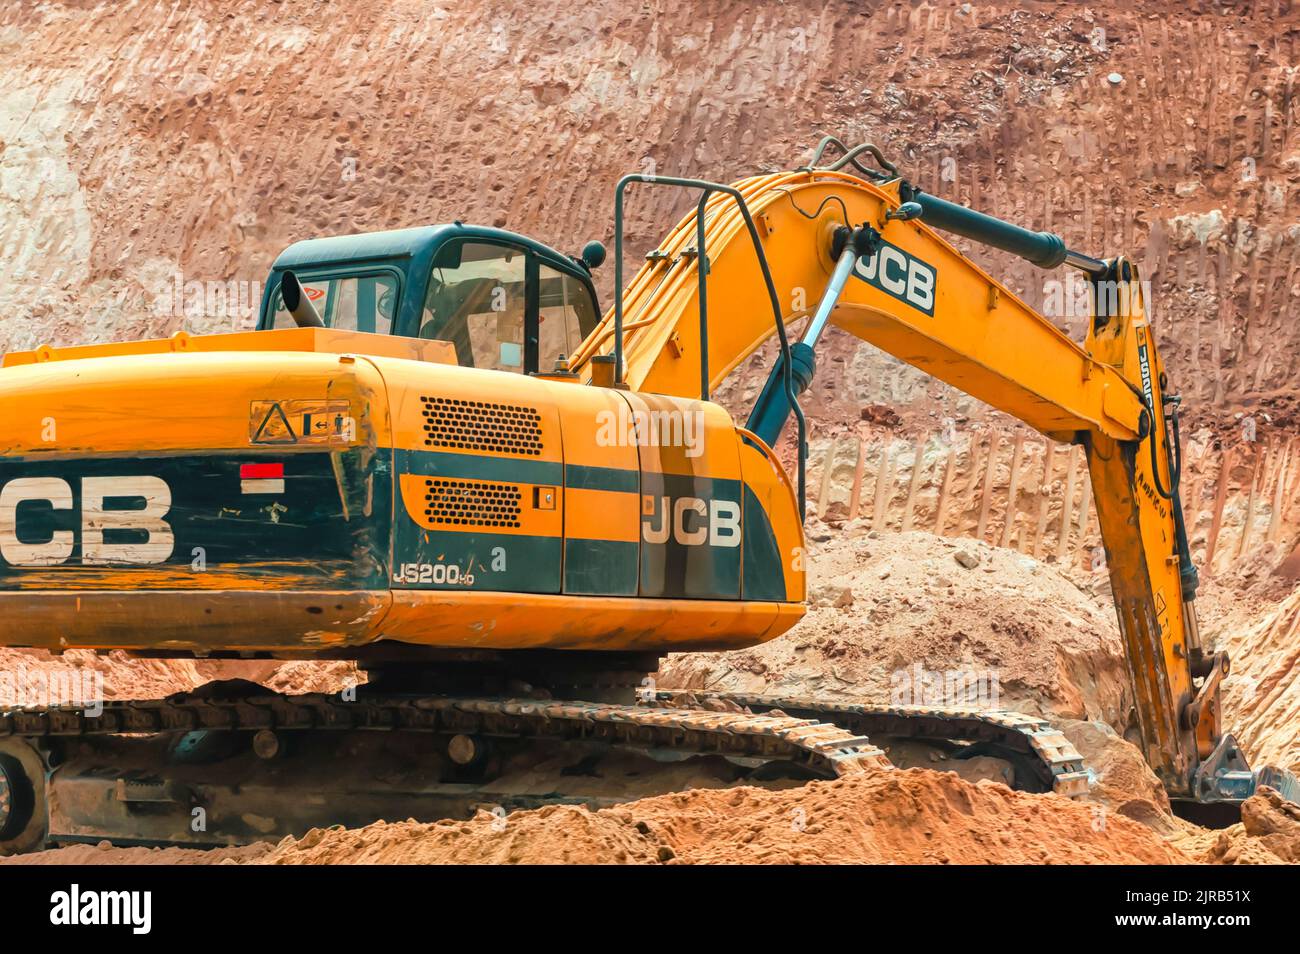 A JCB bulldozer / backhoe loader / dozer / crawler excavating huge volumes of sand while involved in a road building activity in India. Stock Photo